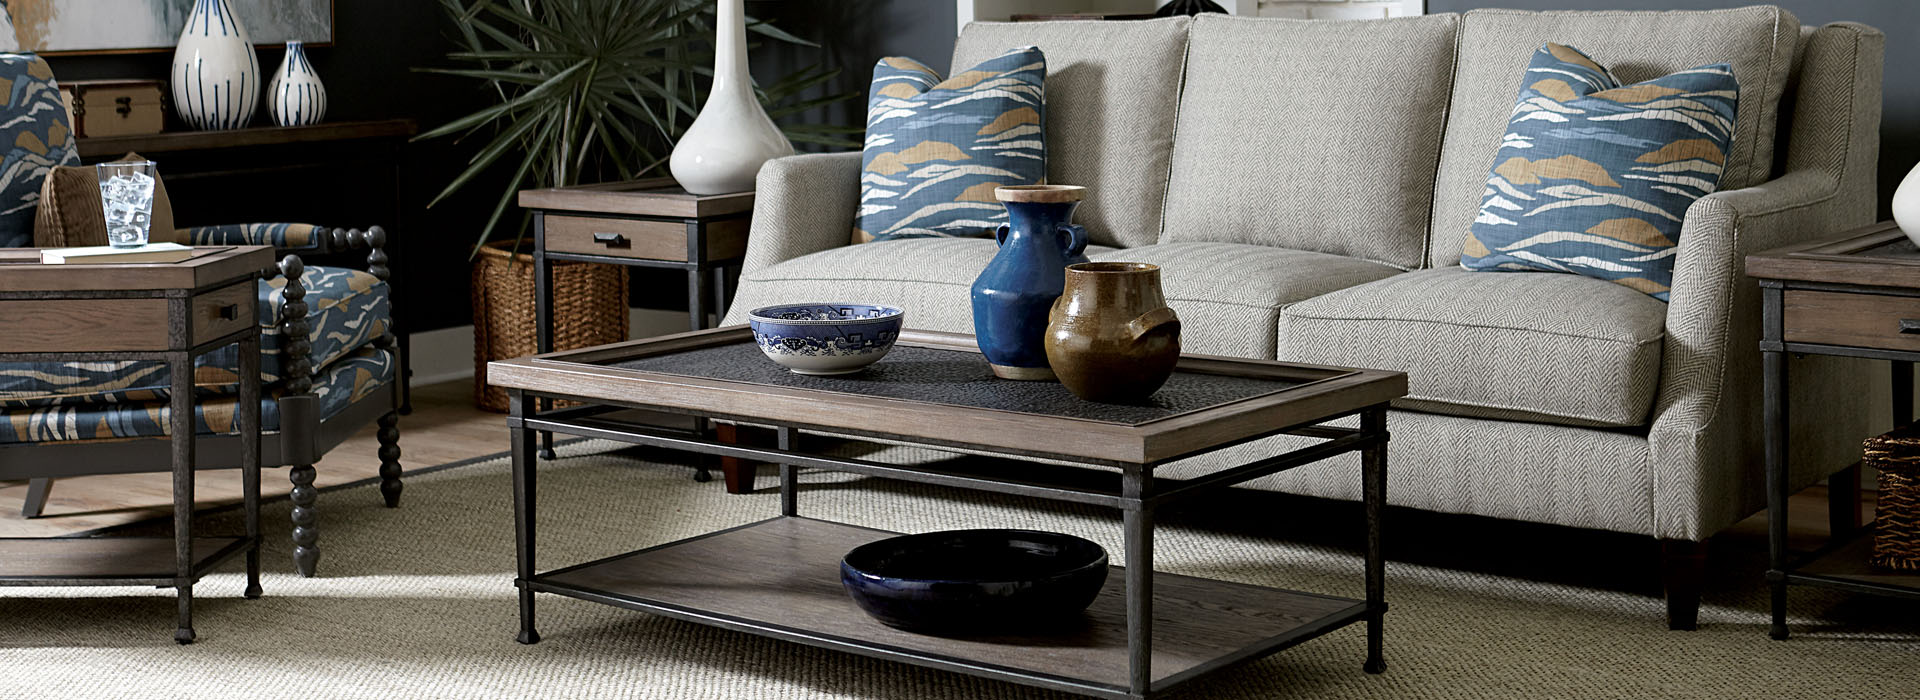 a coffee table with bowls on it